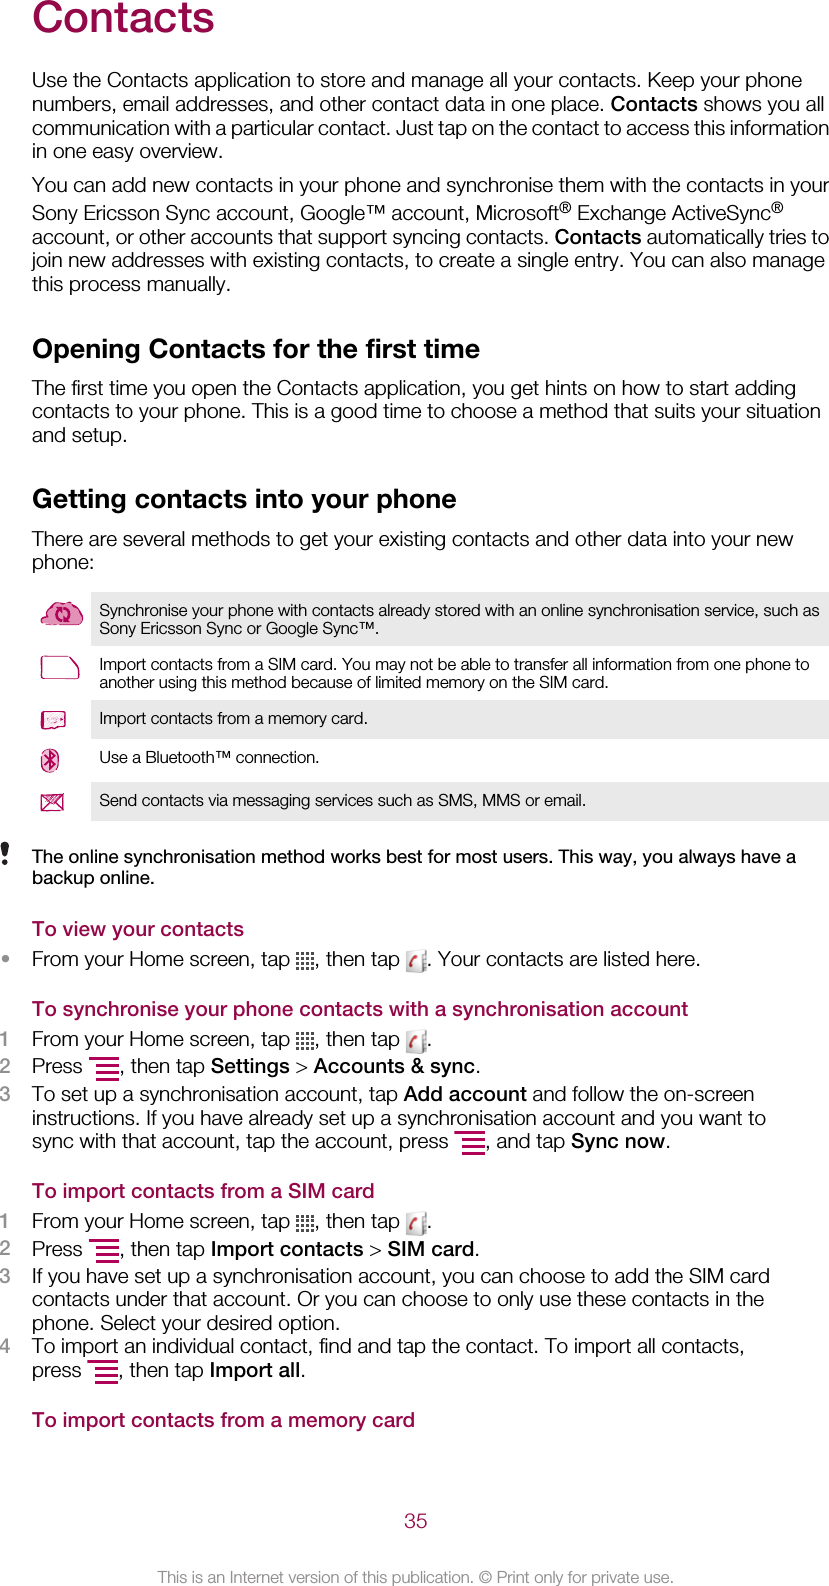 ContactsUse the Contacts application to store and manage all your contacts. Keep your phonenumbers, email addresses, and other contact data in one place. Contacts shows you allcommunication with a particular contact. Just tap on the contact to access this informationin one easy overview.You can add new contacts in your phone and synchronise them with the contacts in yourSony Ericsson Sync account, Google™ account, Microsoft® Exchange ActiveSync®account, or other accounts that support syncing contacts. Contacts automatically tries tojoin new addresses with existing contacts, to create a single entry. You can also managethis process manually.Opening Contacts for the first timeThe first time you open the Contacts application, you get hints on how to start addingcontacts to your phone. This is a good time to choose a method that suits your situationand setup.Getting contacts into your phoneThere are several methods to get your existing contacts and other data into your newphone:Synchronise your phone with contacts already stored with an online synchronisation service, such asSony Ericsson Sync or Google Sync™.Import contacts from a SIM card. You may not be able to transfer all information from one phone toanother using this method because of limited memory on the SIM card.Import contacts from a memory card.Use a Bluetooth™ connection.Send contacts via messaging services such as SMS, MMS or email.The online synchronisation method works best for most users. This way, you always have abackup online.To view your contacts•From your Home screen, tap  , then tap  . Your contacts are listed here.To synchronise your phone contacts with a synchronisation account1From your Home screen, tap  , then tap  .2Press  , then tap Settings &gt; Accounts &amp; sync.3To set up a synchronisation account, tap Add account and follow the on-screeninstructions. If you have already set up a synchronisation account and you want tosync with that account, tap the account, press  , and tap Sync now.To import contacts from a SIM card1From your Home screen, tap  , then tap  .2Press  , then tap Import contacts &gt; SIM card.3If you have set up a synchronisation account, you can choose to add the SIM cardcontacts under that account. Or you can choose to only use these contacts in thephone. Select your desired option.4To import an individual contact, find and tap the contact. To import all contacts,press  , then tap Import all.To import contacts from a memory card35This is an Internet version of this publication. © Print only for private use.